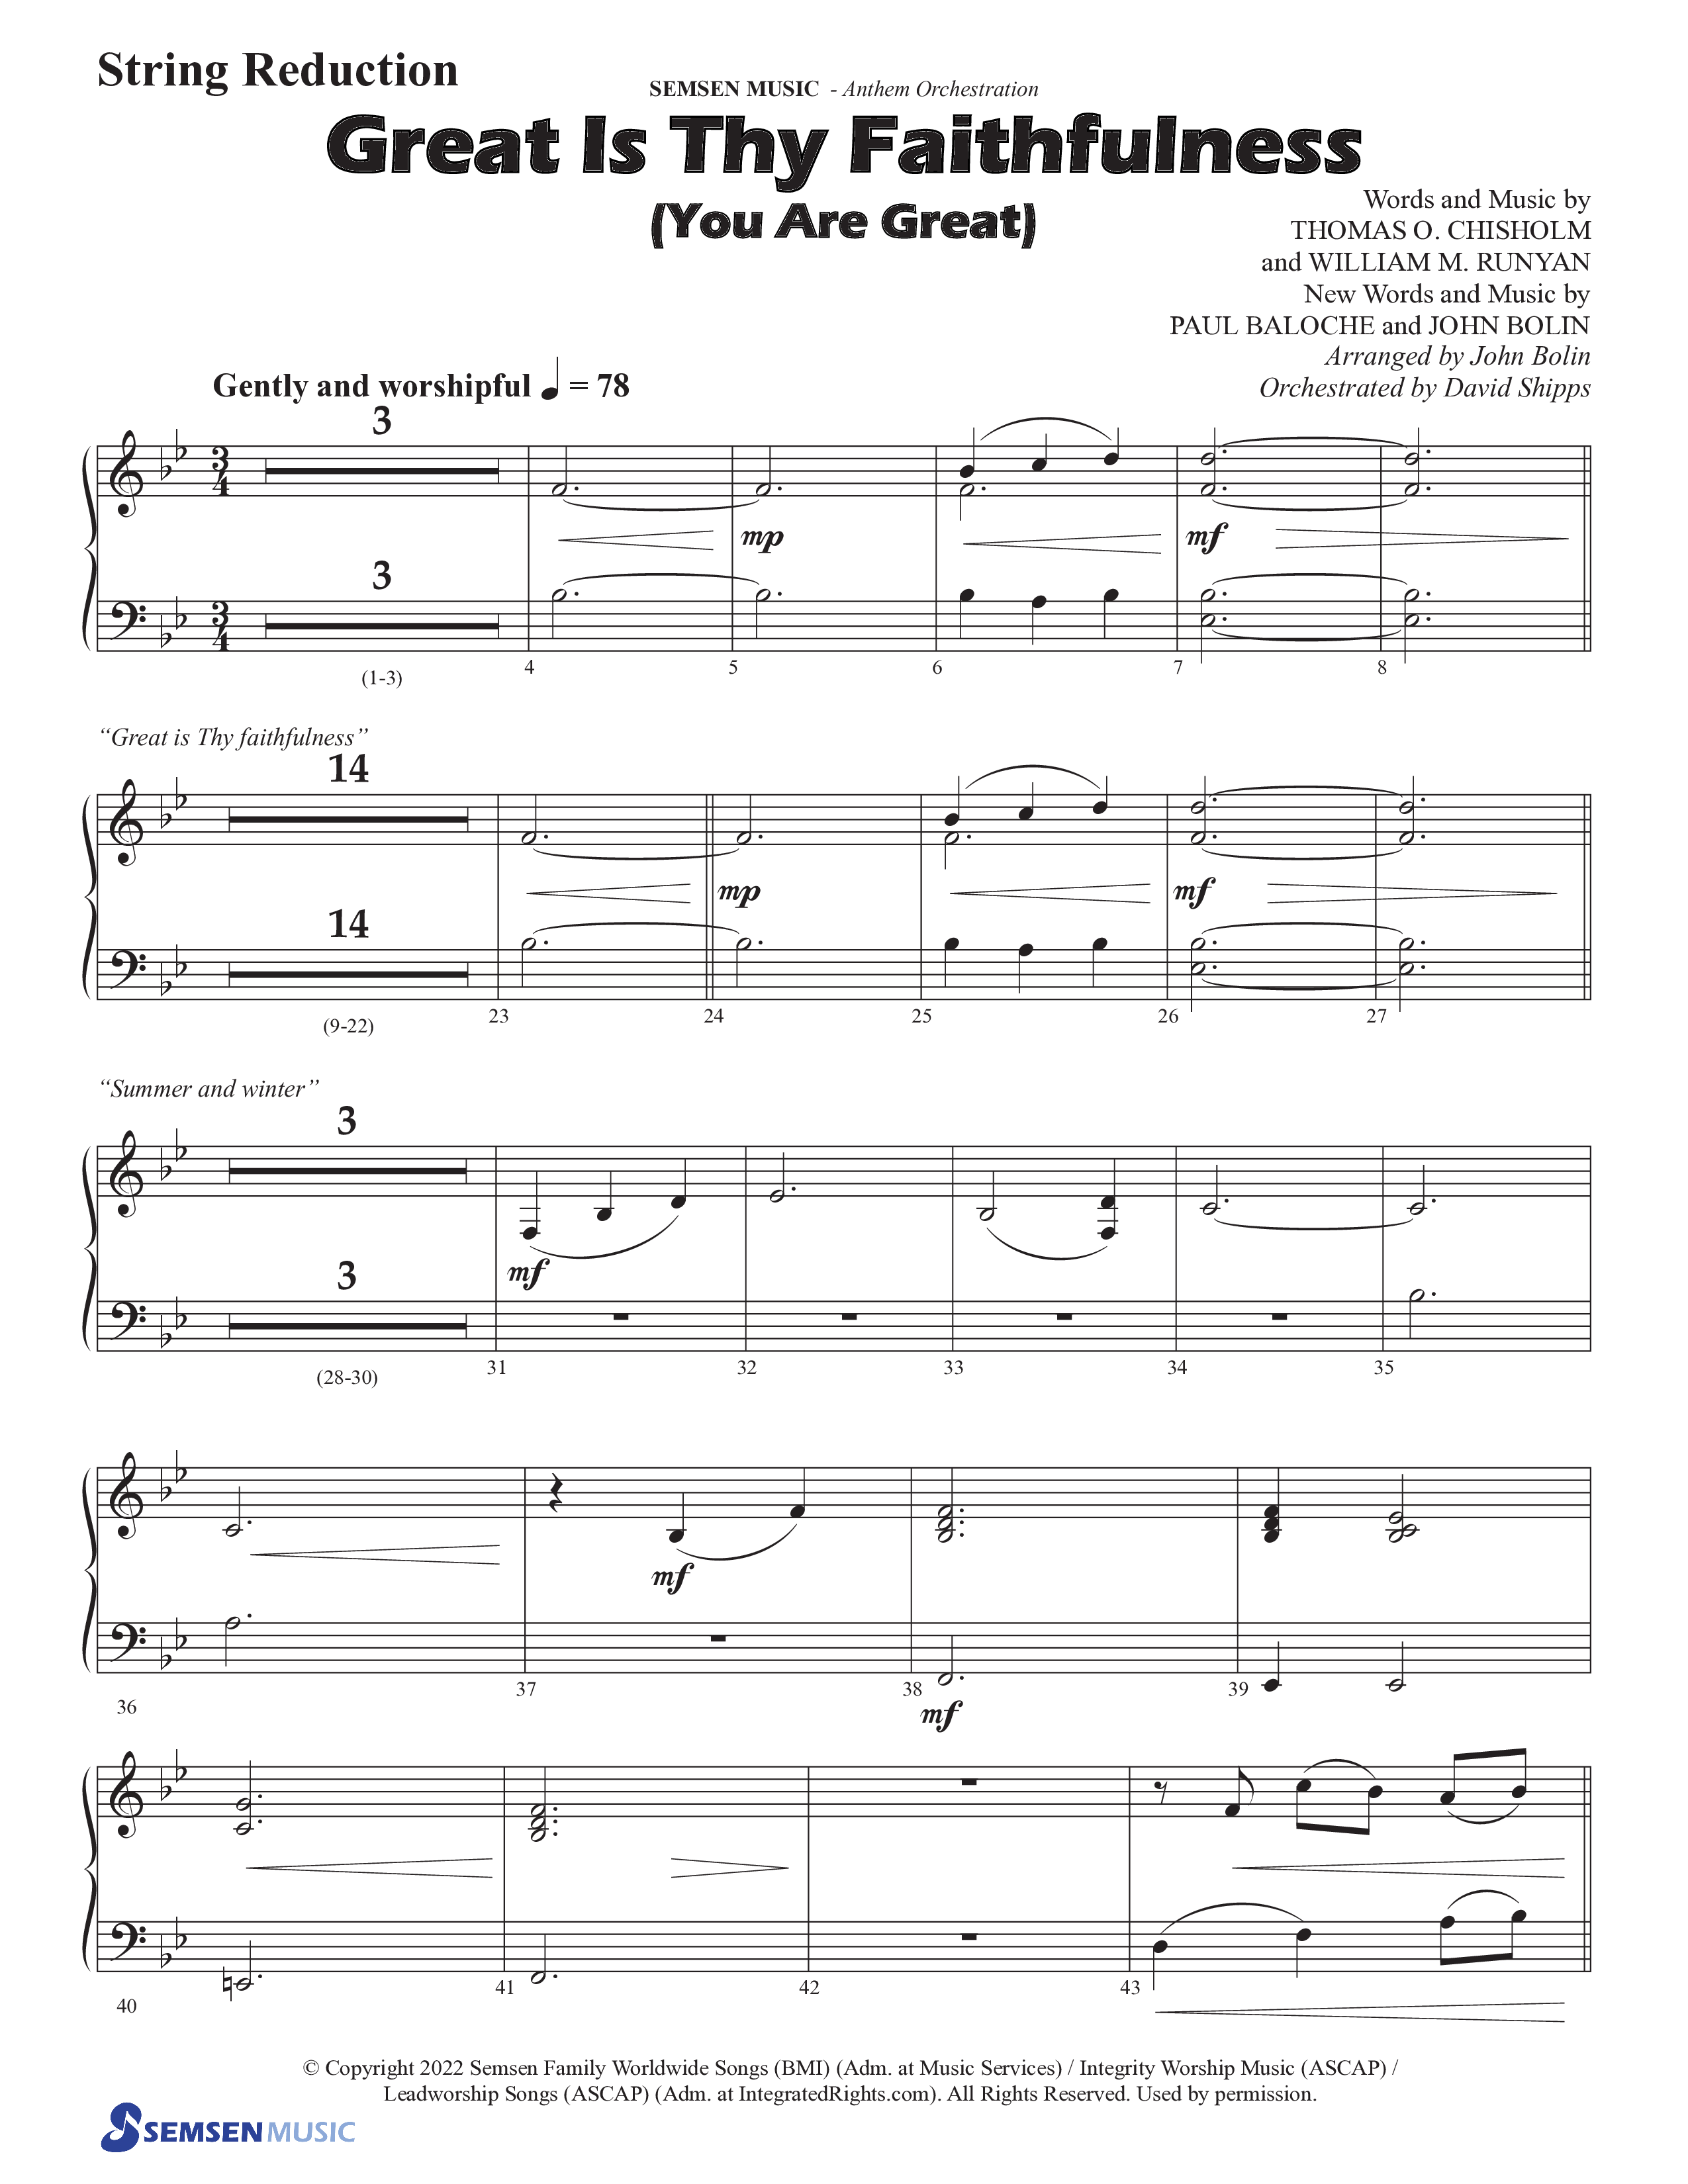 Great Is Thy Faithfulness (You Are Great) (Choral Anthem SATB) String Reduction (Semsen Music / Arr. John Bolin / Orch. David Shipps)